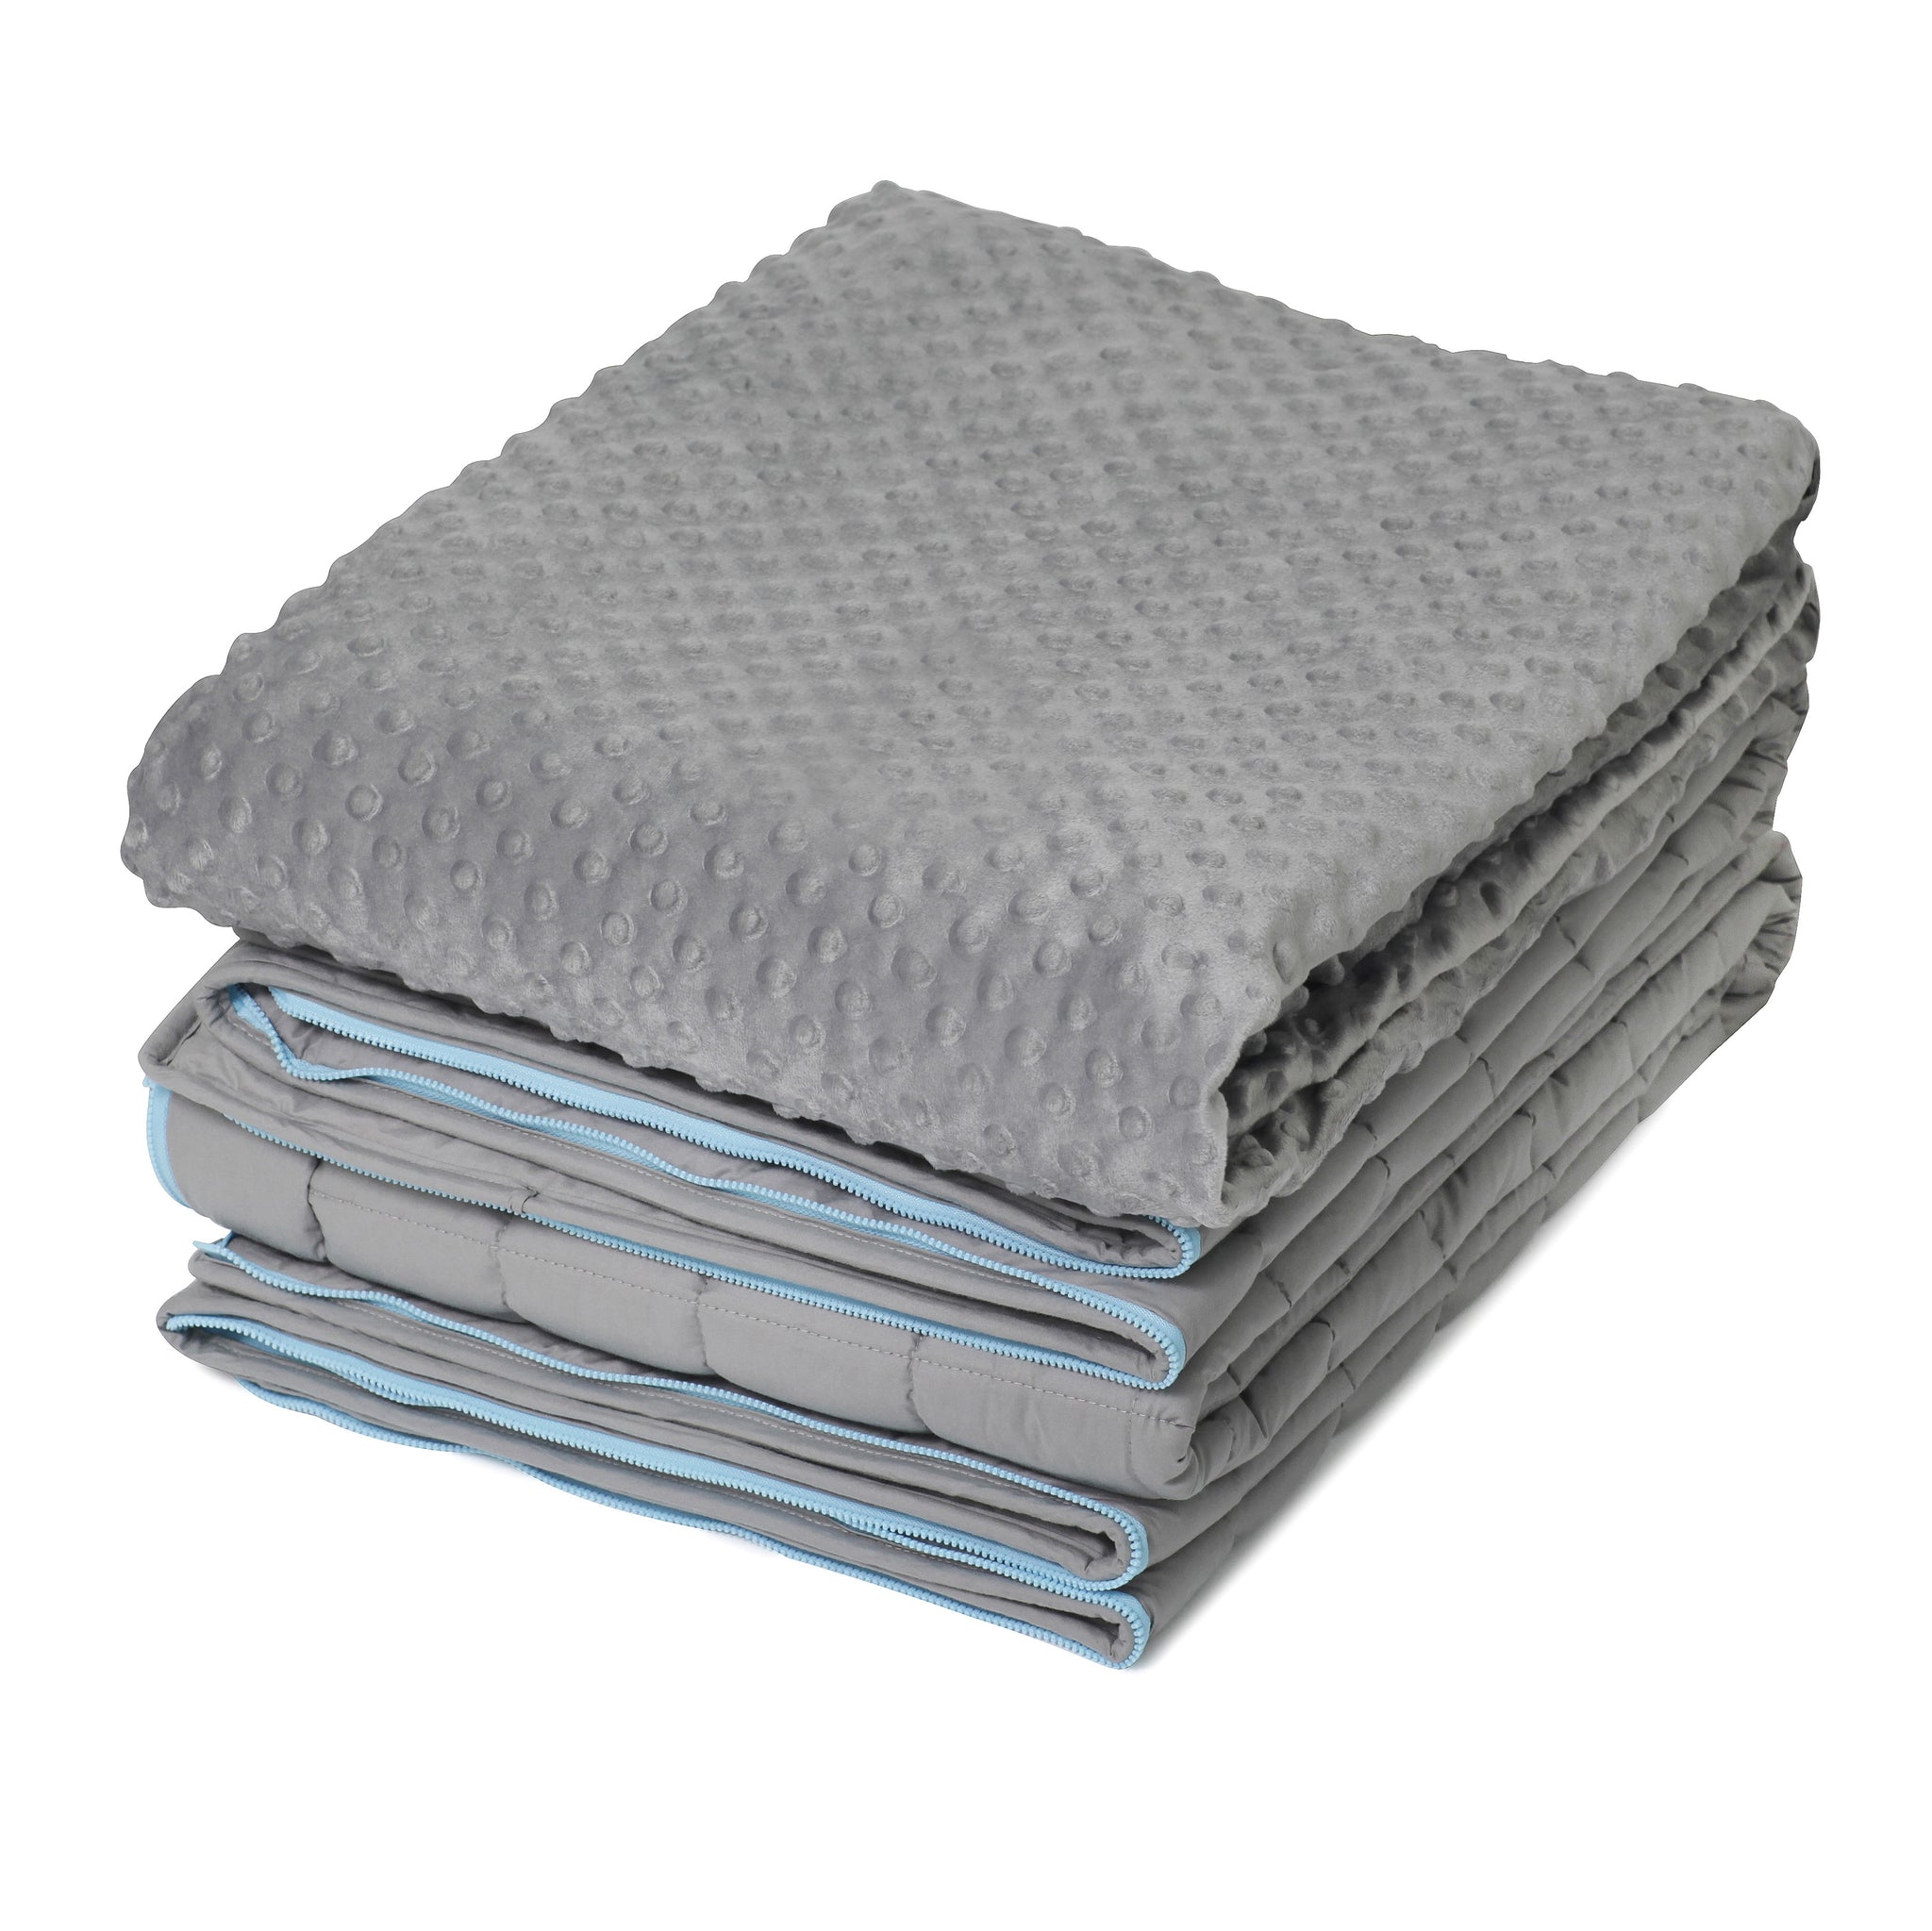 10 lb Weighted Blanket in Grey with Patented Zipper System | Serenity